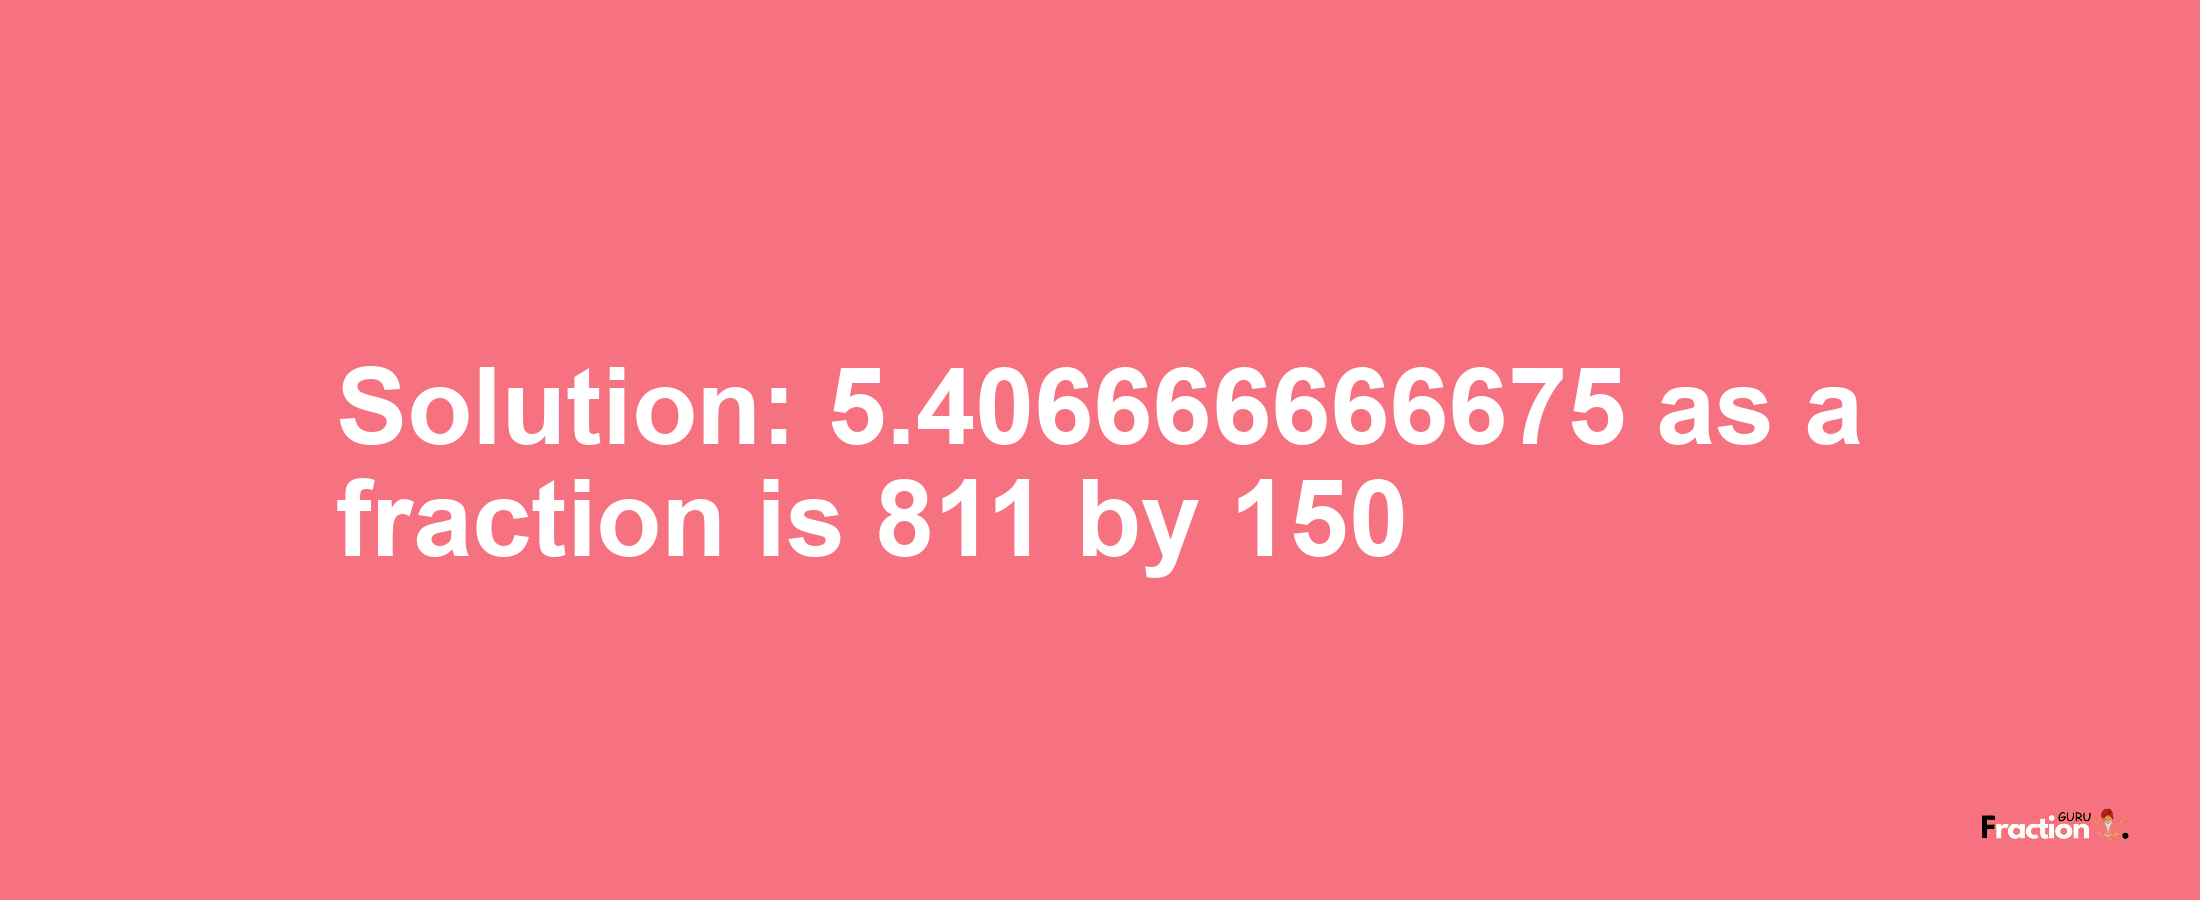 Solution:5.406666666675 as a fraction is 811/150